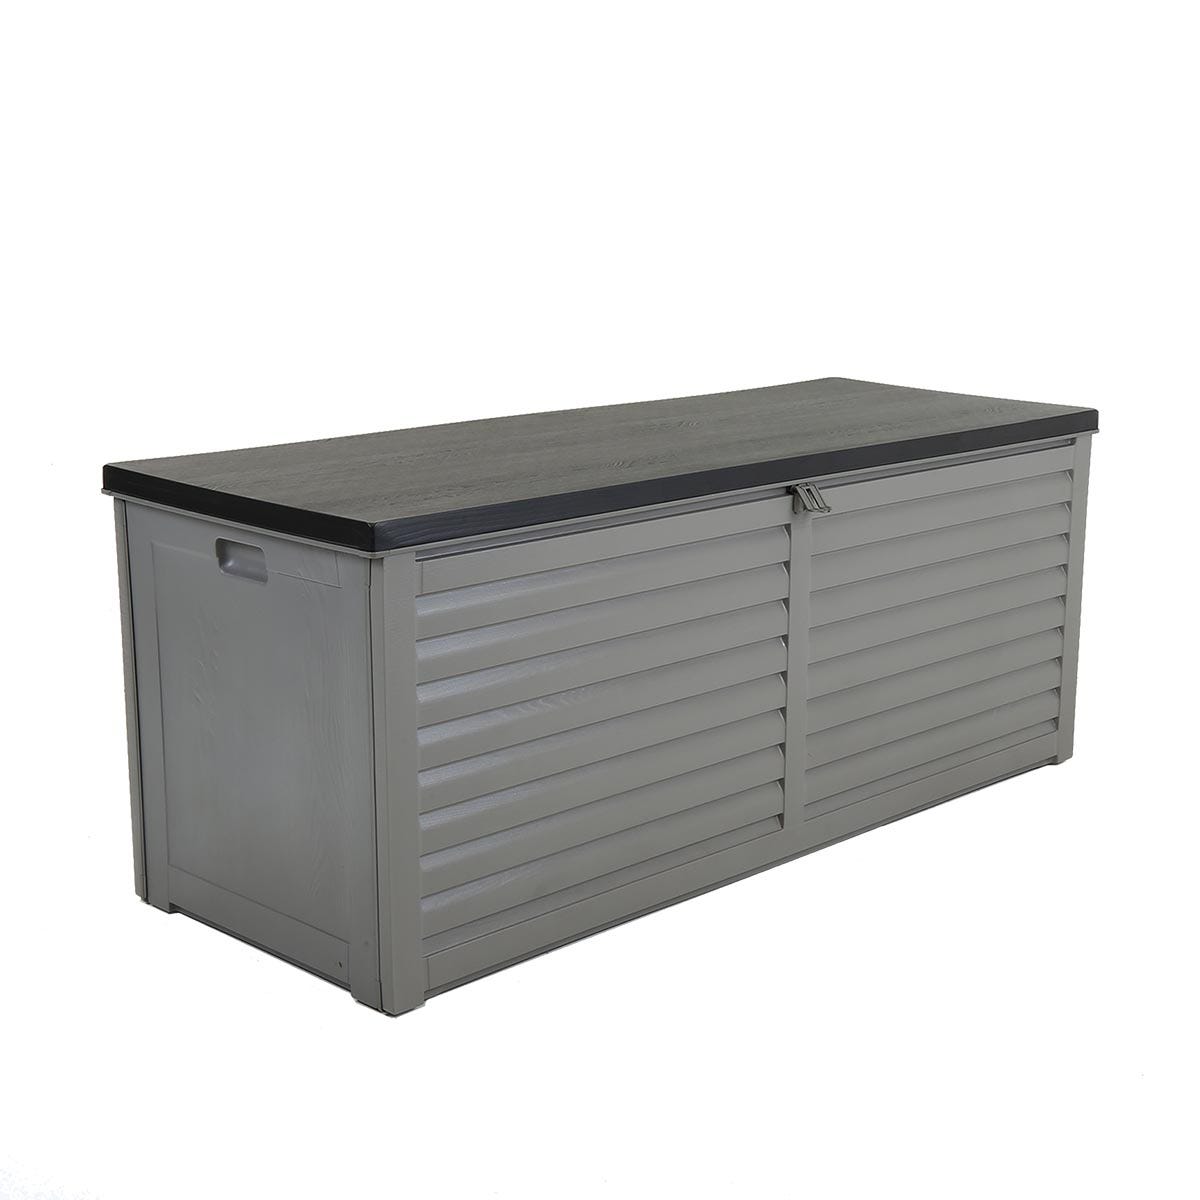 Charles Bentley 390l Large Outdoor Plastic Storage Box Grey And Black